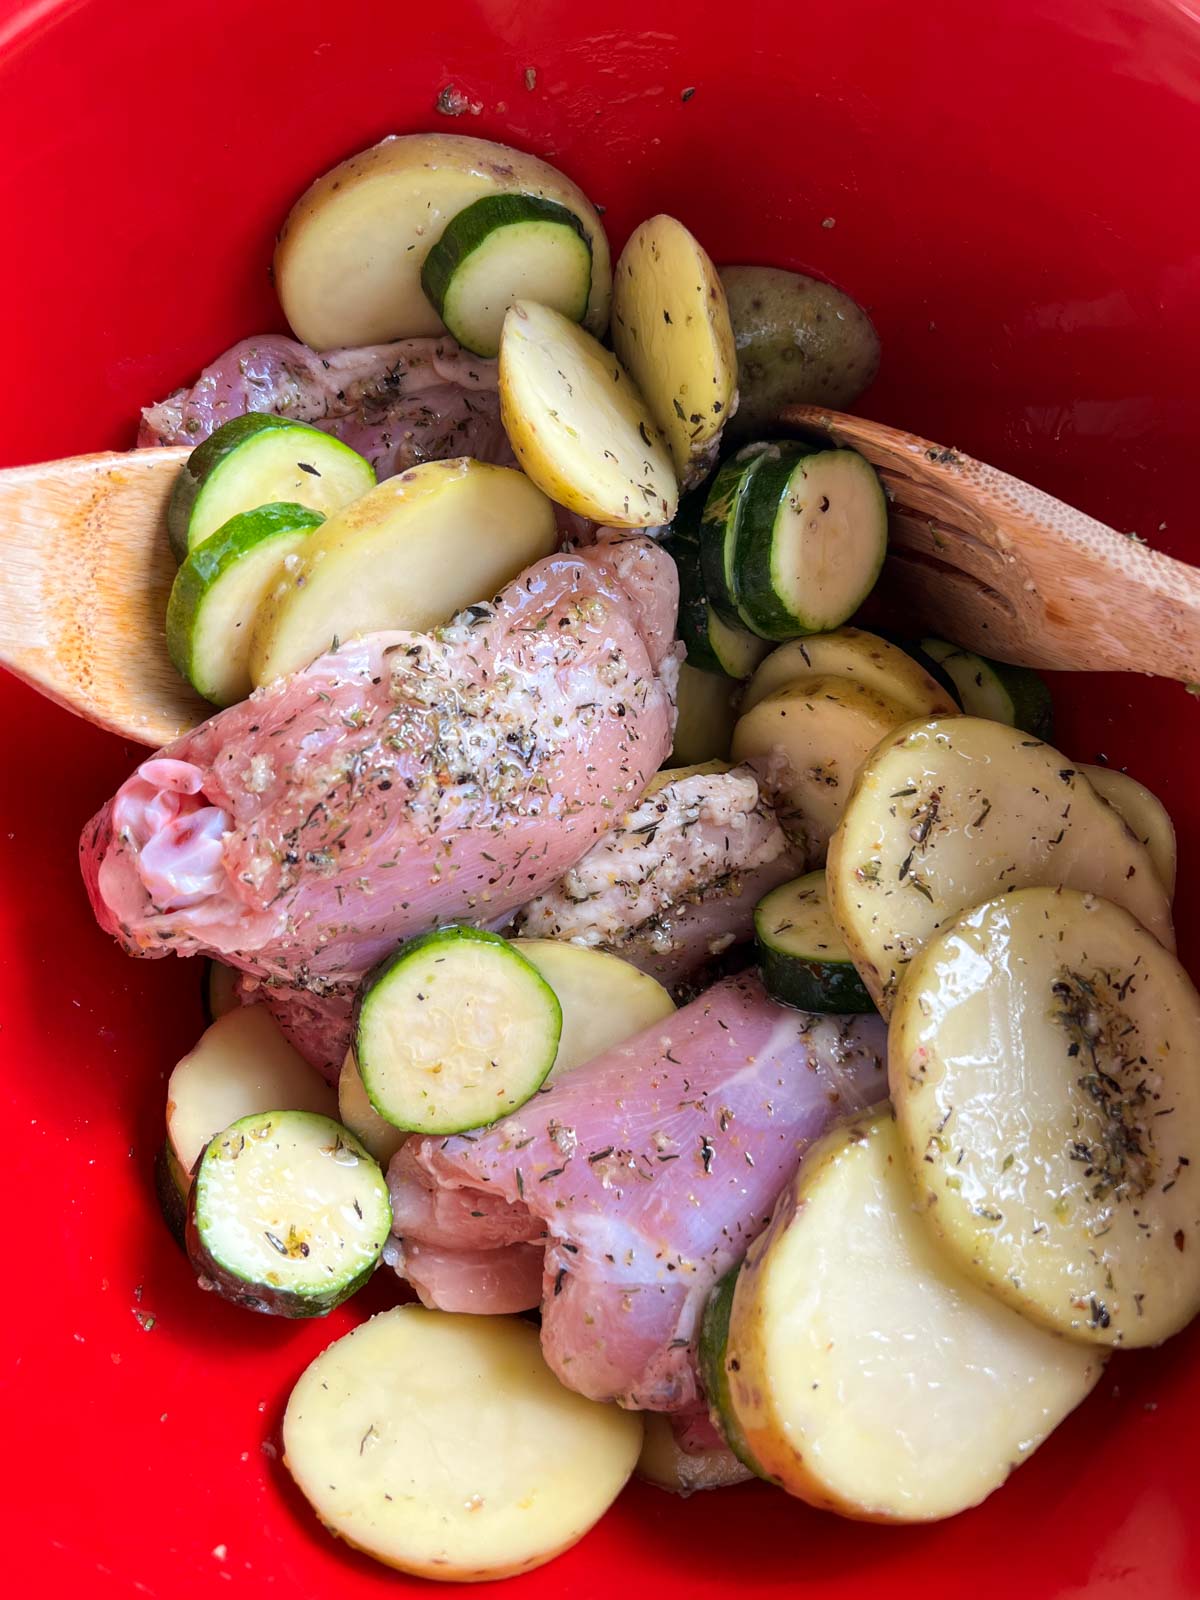 Tossing chicken, potatoes and zucchini with herb oil in a red bowl